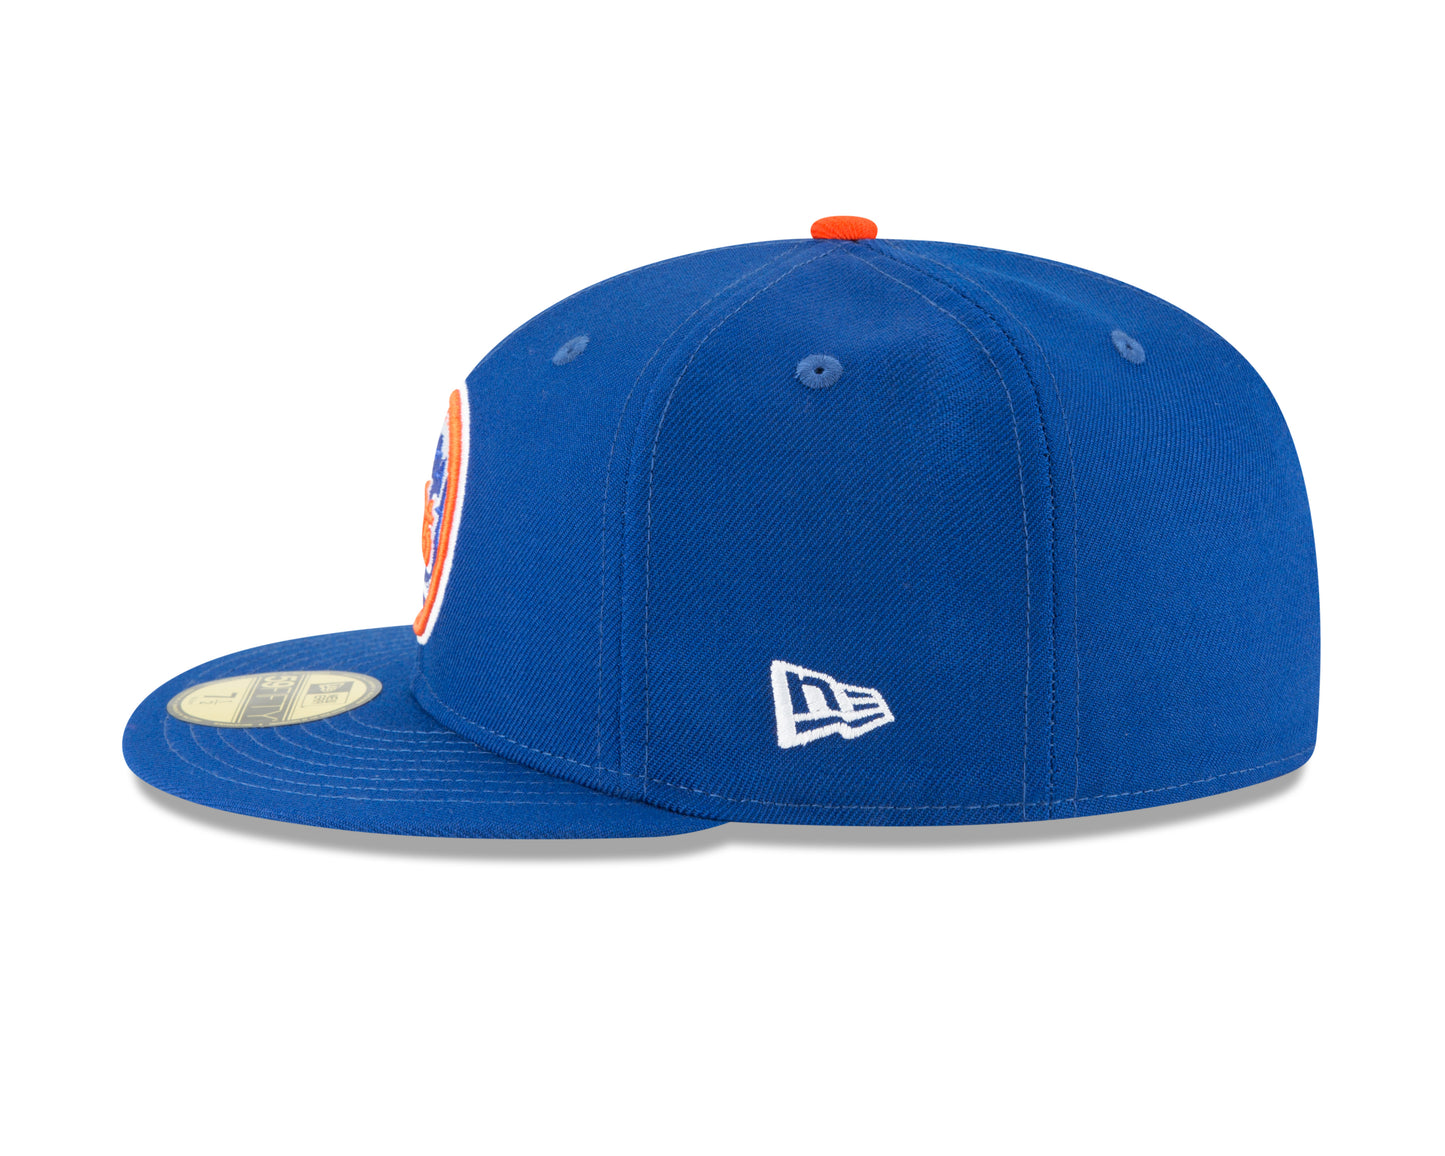 New York Mets New Era Cooperstown 1962 59FIFTY Fitted Hat - Royal